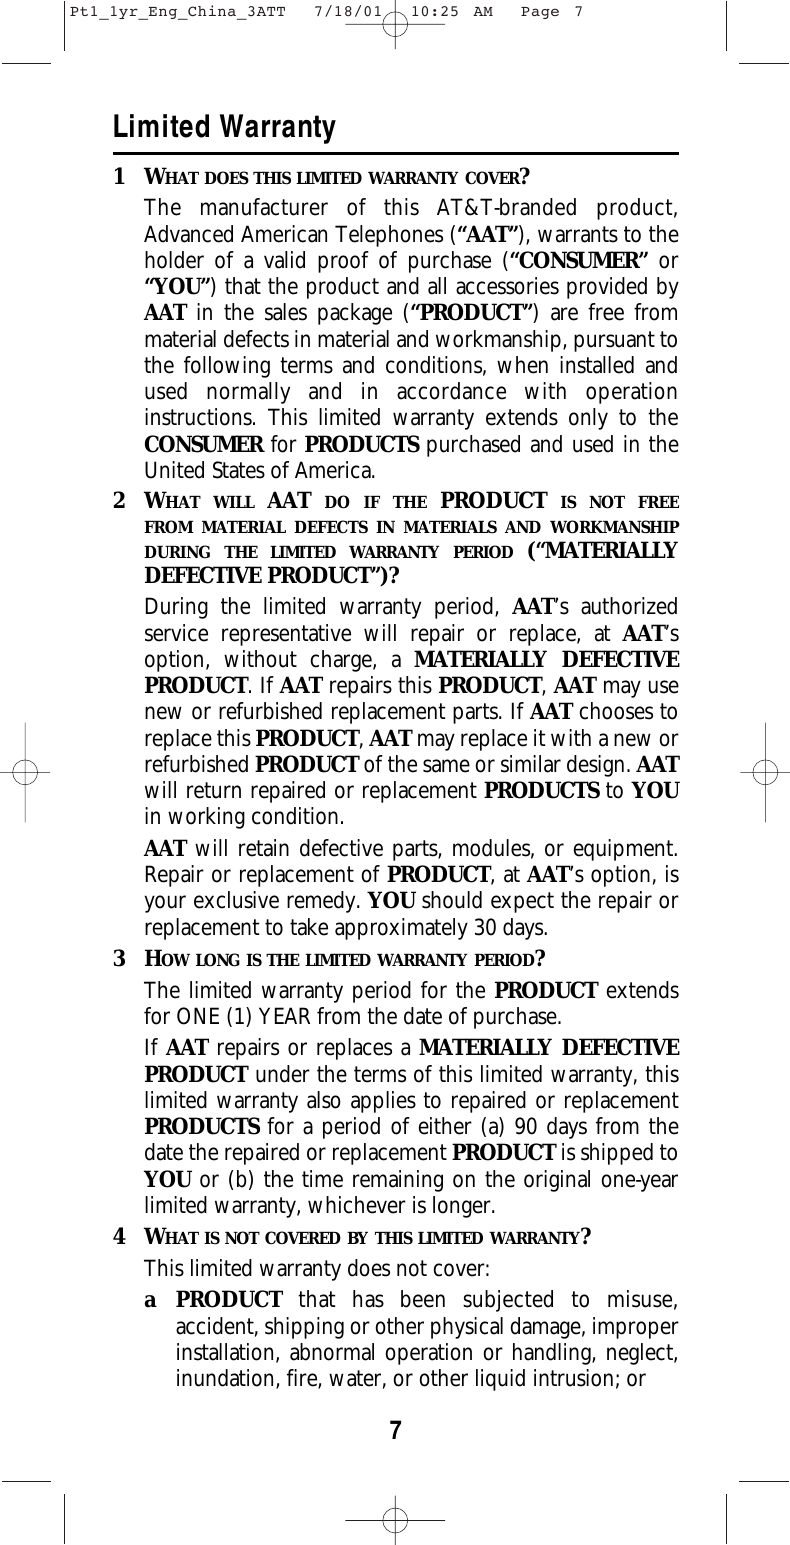 7Limited Warranty1WHAT DOES THIS LIMITED WARRANTY COVER?The manufacturer of this AT&amp;T-branded product,Advanced American Telephones (“AAT”), warrants to theholder of a valid proof of purchase (“CONSUMER” or“YOU”) that the product and all accessories provided byAAT in the sales package (“PRODUCT”) are free frommaterial defects in material and workmanship, pursuant tothe following terms and conditions, when installed andused normally and in accordance with operationinstructions. This limited warranty extends only to theCONSUMER for PRODUCTS purchased and used in theUnited States of America.2WHAT WILL AAT  DO IF THE PRODUCT IS NOT FREEFROM MATERIAL DEFECTS IN MATERIALS AND WORKMANSHIPDURING THE LIMITED WARRANTY PERIOD (“MATERIALLYDEFECTIVE PRODUCT”)?During the limited warranty period, AAT’s authorizedservice representative will repair or replace, at AAT’soption, without charge, a MATERIALLY DEFECTIVEPRODUCT. If AAT repairs this PRODUCT, AAT may usenew or refurbished replacement parts. If AAT chooses toreplace this PRODUCT, AAT may replace it with a new orrefurbished PRODUCT of the same or similar design. AATwill return repaired or replacement PRODUCTS to YOUin working condition.  AAT will retain defective parts, modules, or equipment.Repair or replacement of PRODUCT, at AAT’s option, isyour exclusive remedy. YOU should expect the repair orreplacement to take approximately 30 days.3HOW LONG IS THE LIMITED WARRANTY PERIOD?The limited warranty period for the PRODUCT extendsfor ONE (1) YEAR from the date of purchase.  If AAT repairs or replaces a MATERIALLY DEFECTIVEPRODUCT under the terms of this limited warranty, thislimited warranty also applies to repaired or replacementPRODUCTS for a period of either (a) 90 days from thedate the repaired or replacement PRODUCT is shipped toYOU or (b) the time remaining on the original one-yearlimited warranty, whichever is longer.  4WHAT IS NOT COVERED BY THIS LIMITED WARRANTY?This limited warranty does not cover:a PRODUCT that has been subjected to misuse,accident, shipping or other physical damage, improperinstallation, abnormal operation or handling, neglect,inundation, fire, water, or other liquid intrusion; orPt1_1yr_Eng_China_3ATT  7/18/01  10:25 AM  Page 7